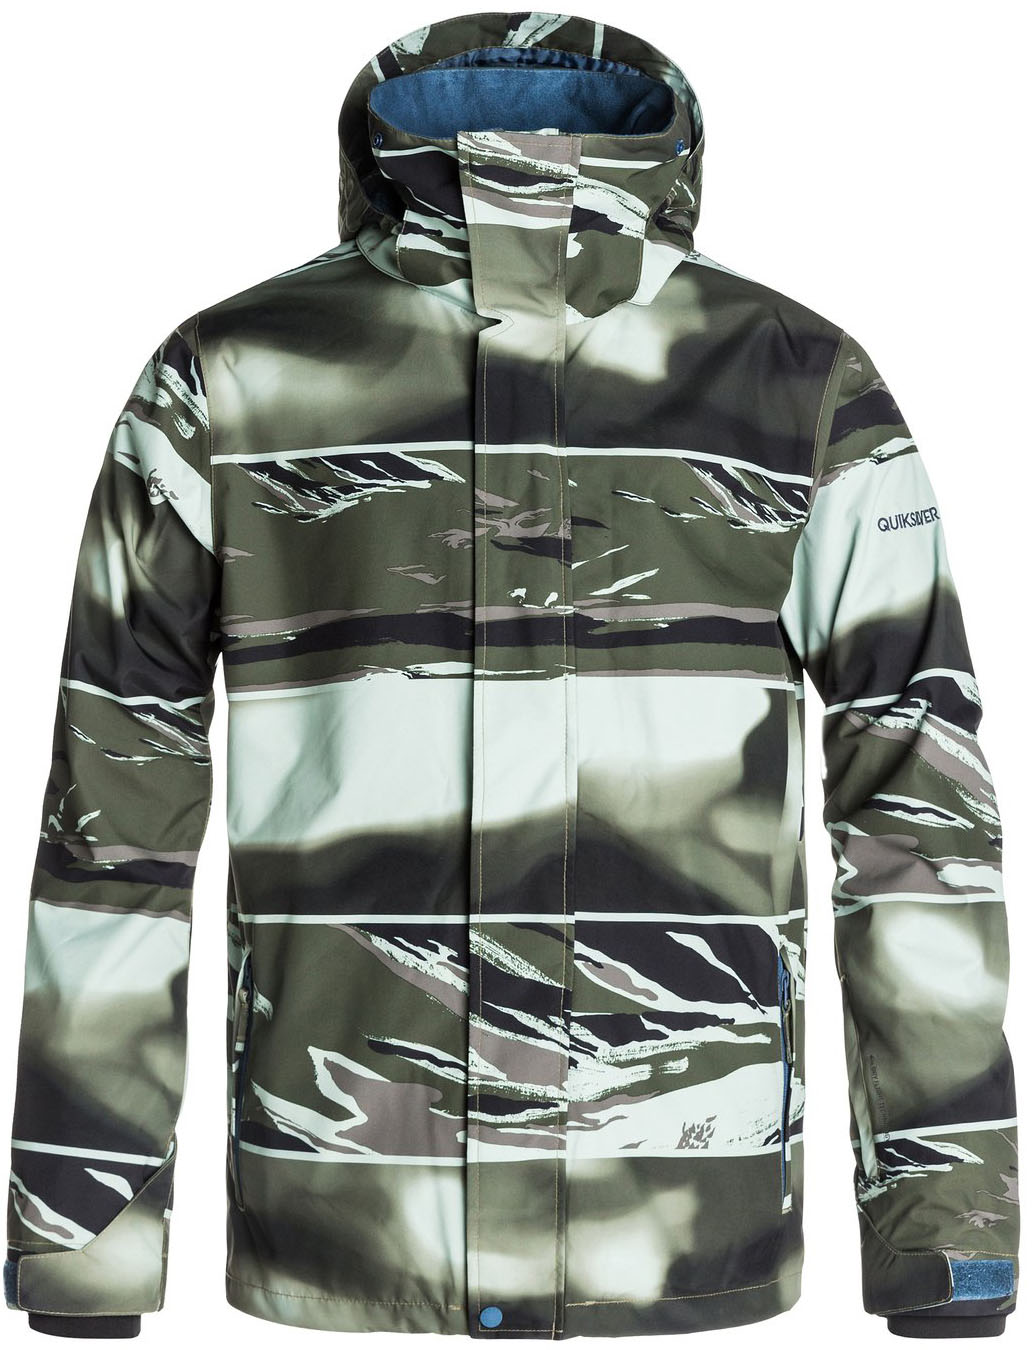 Expertise Archeoloog revolutie Quiksilver Mission Print Snowboard Jacket Review - The Good Ride